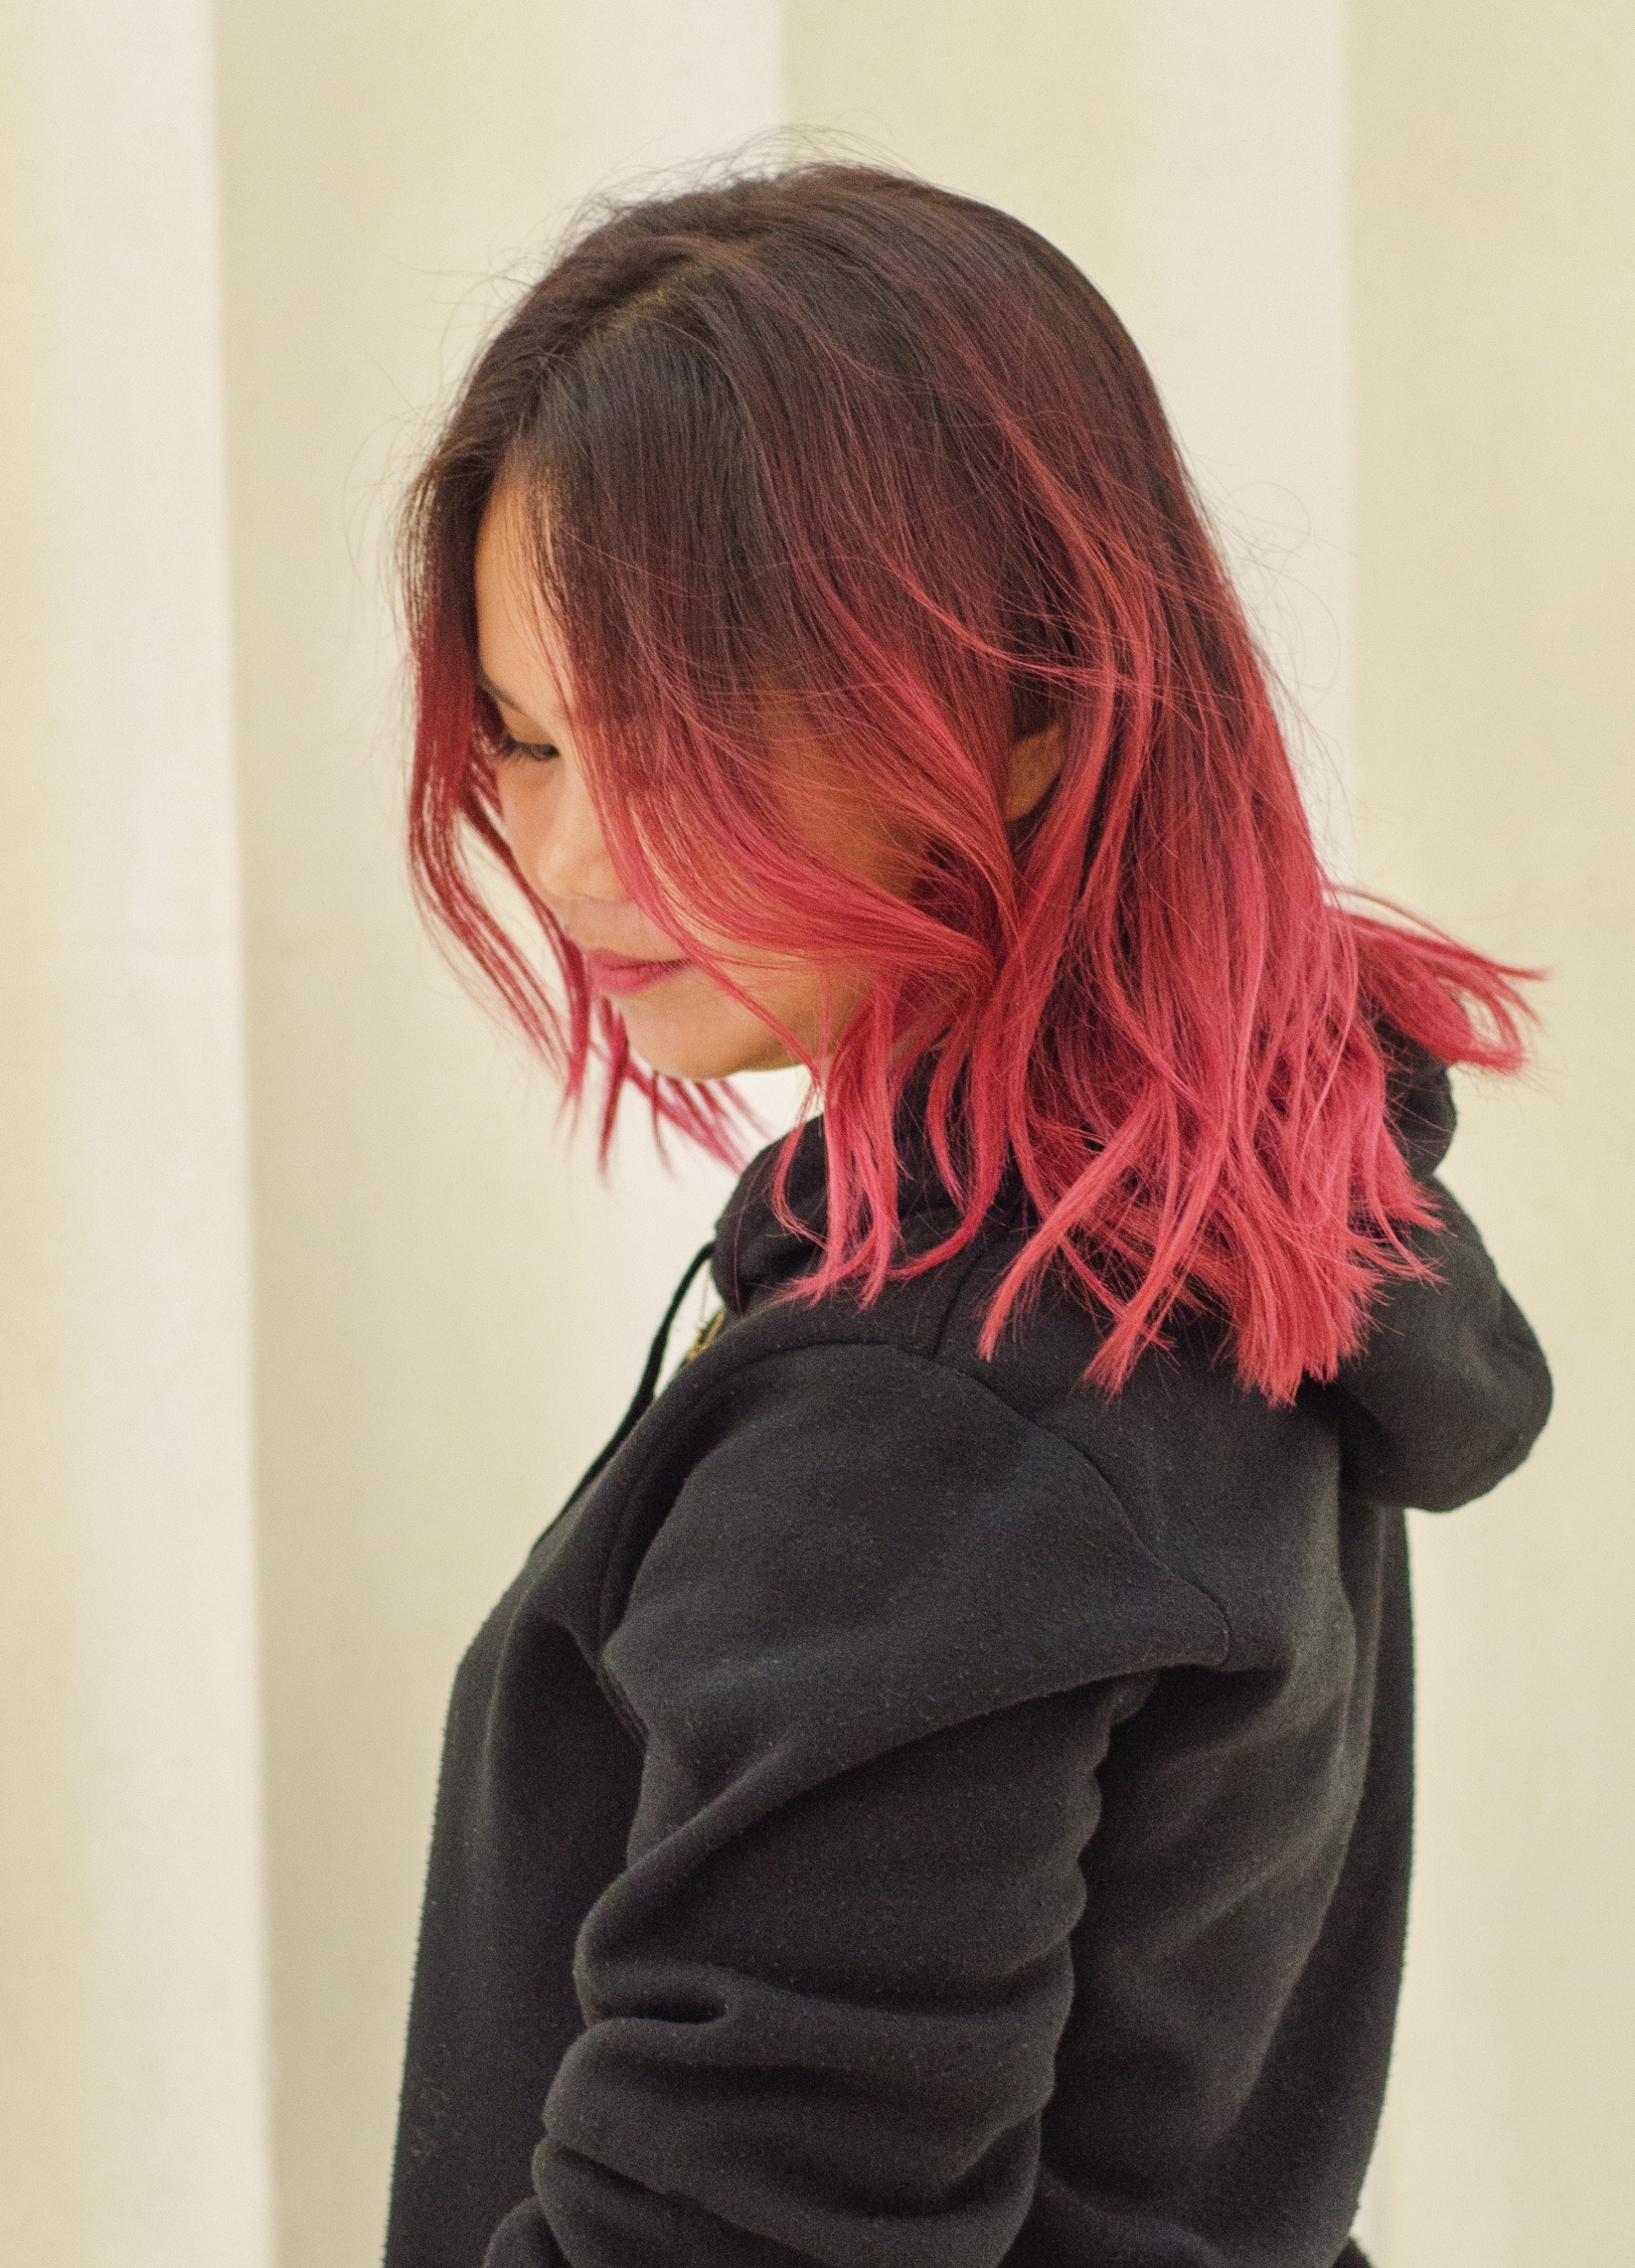 Brown Hair With Pink Highlights | How To Get The On-trend Look.